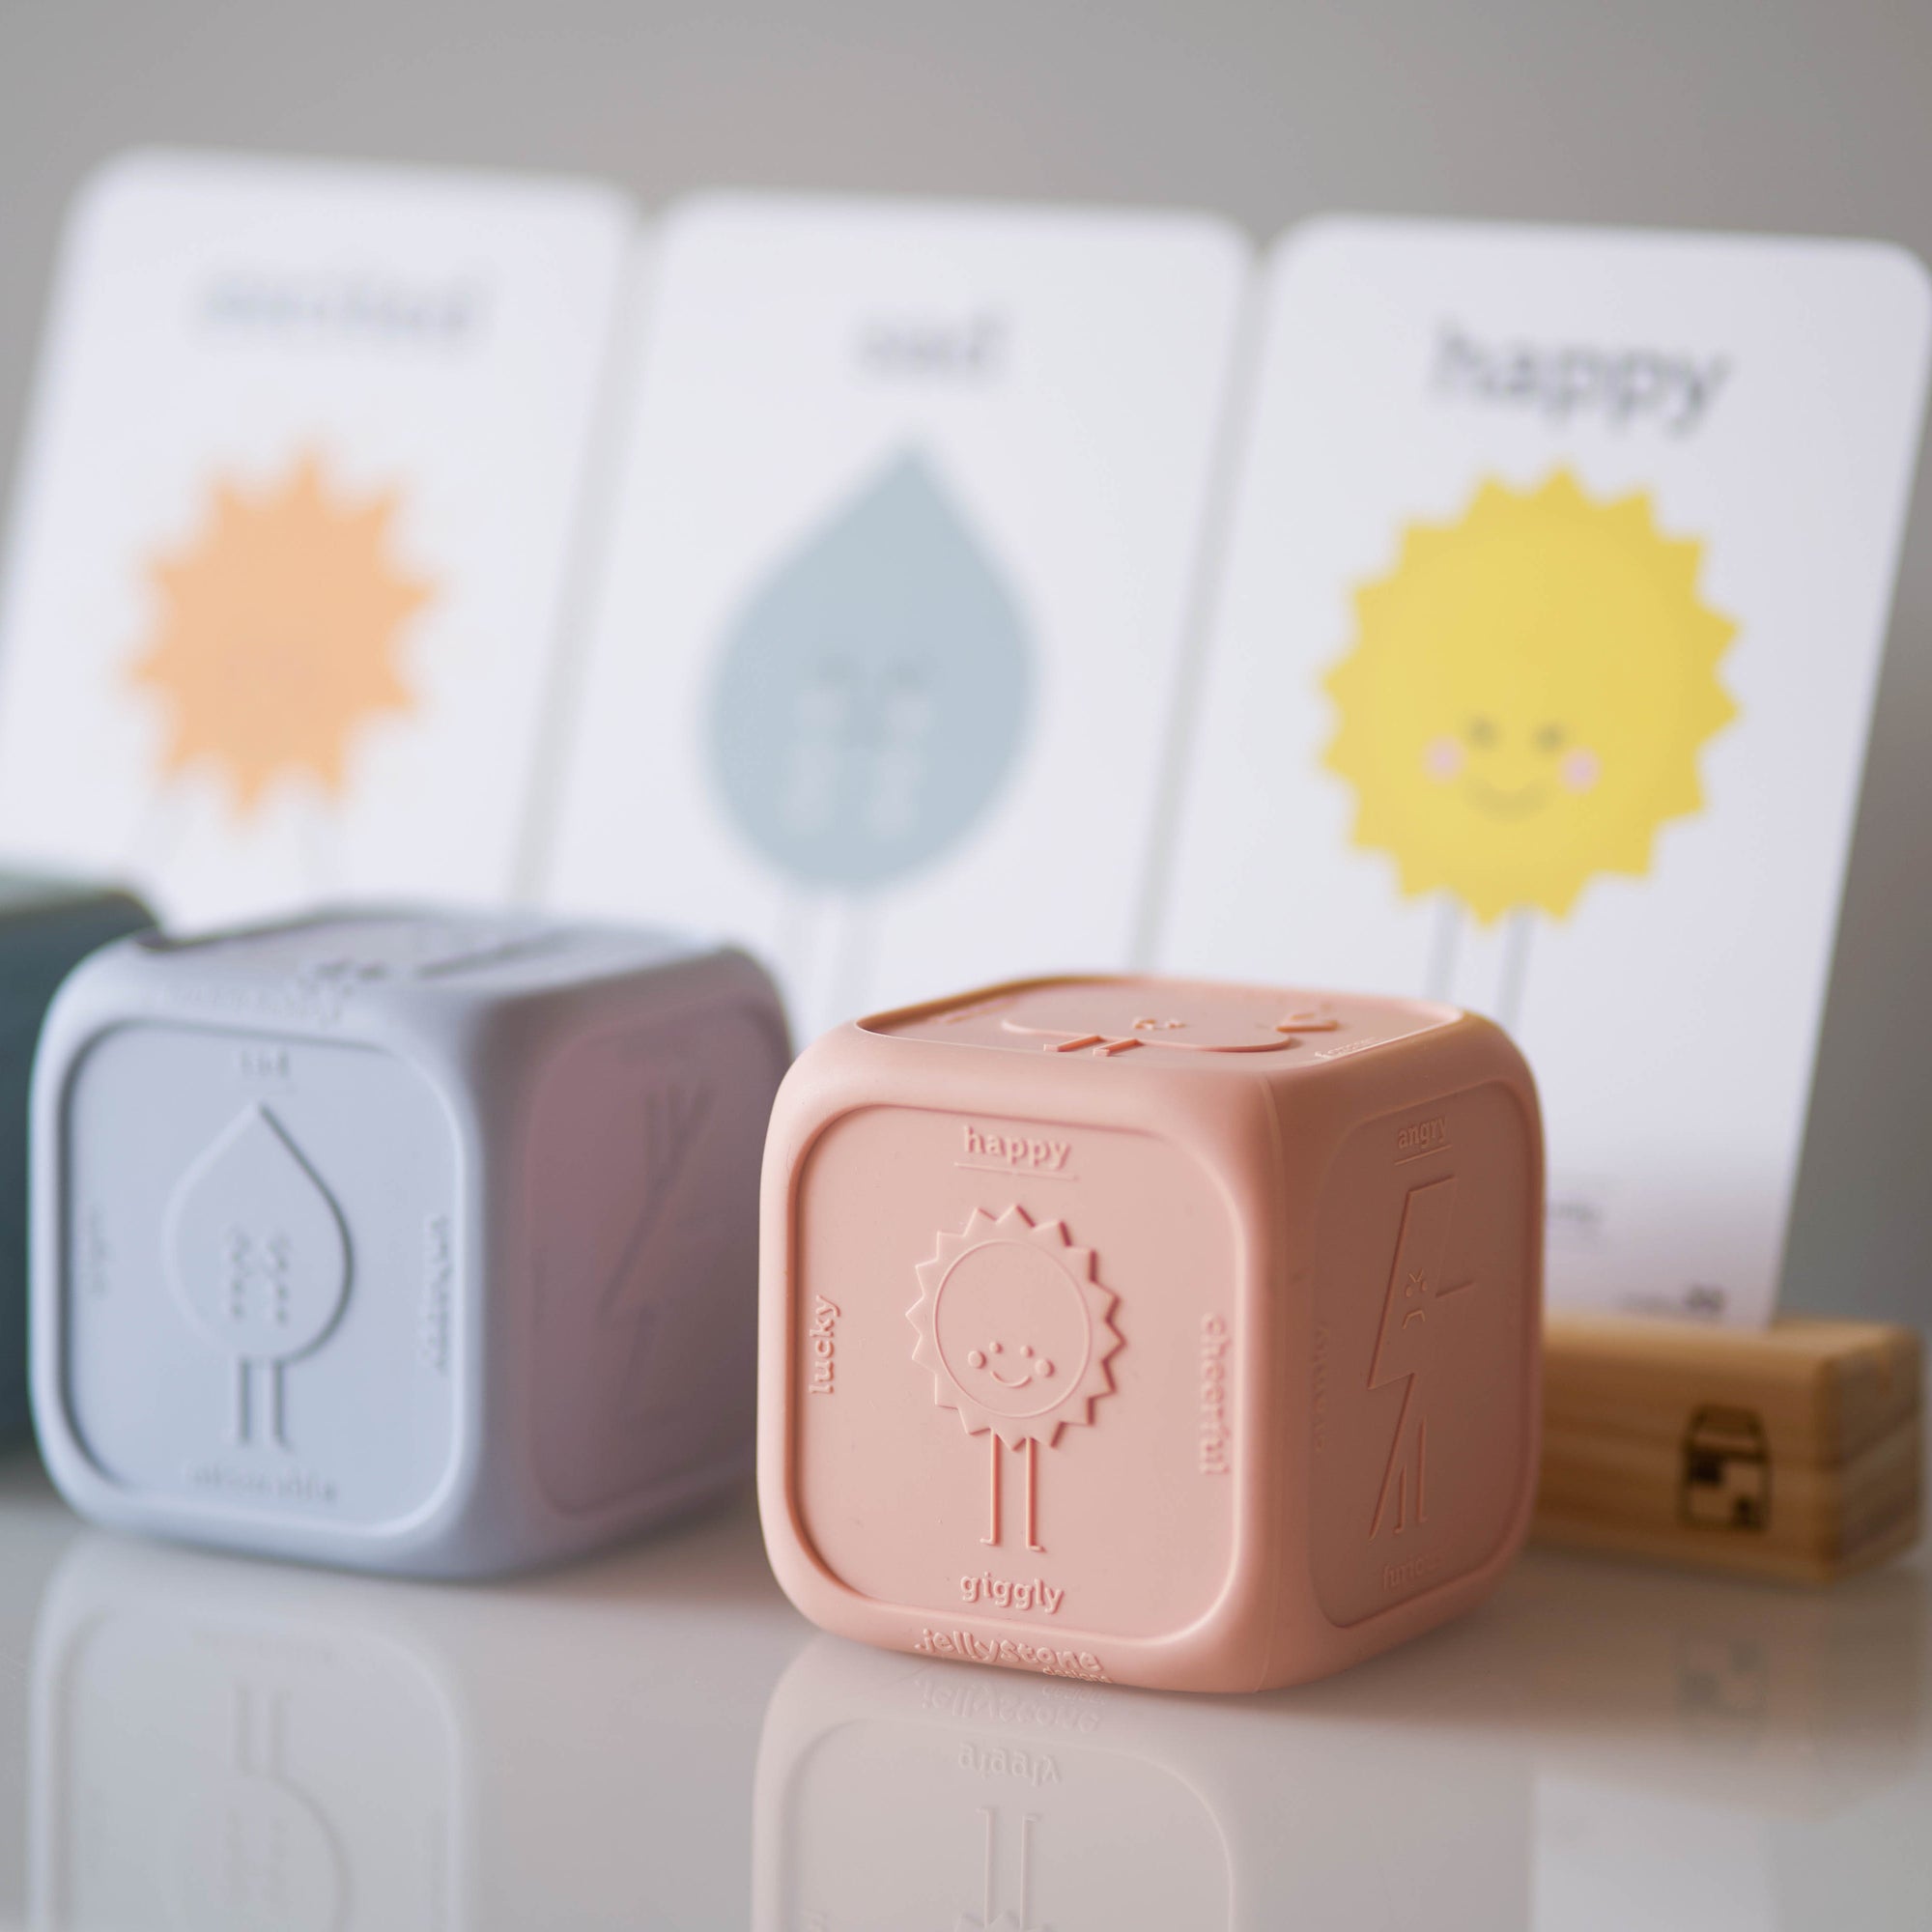 Feelings Cube on a table with cards